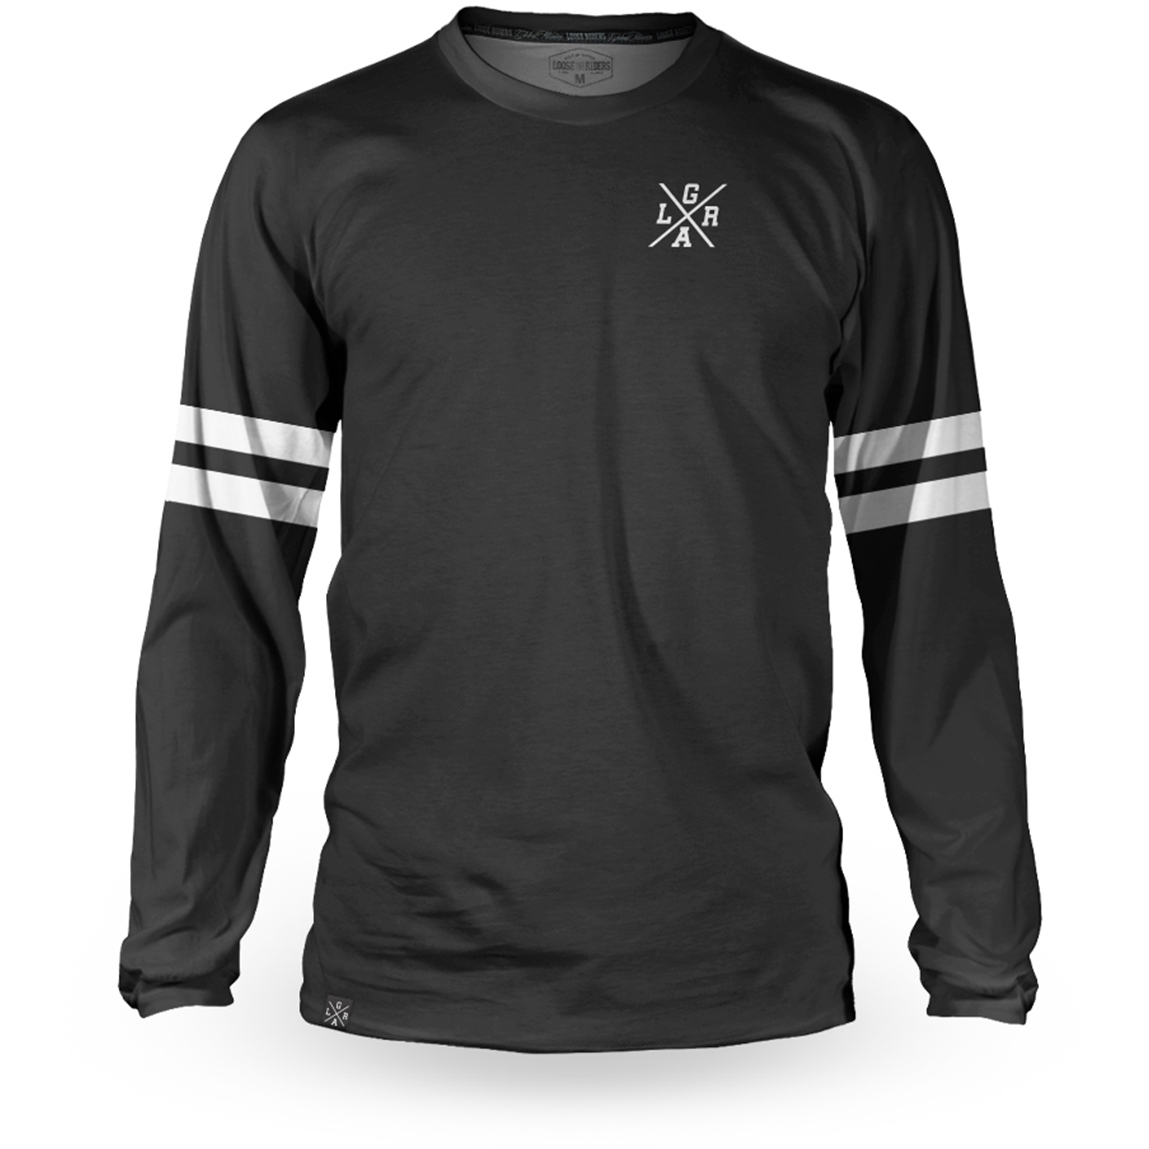 Picture of Loose Riders Heritage Technical Long Sleeve Jersey - Black